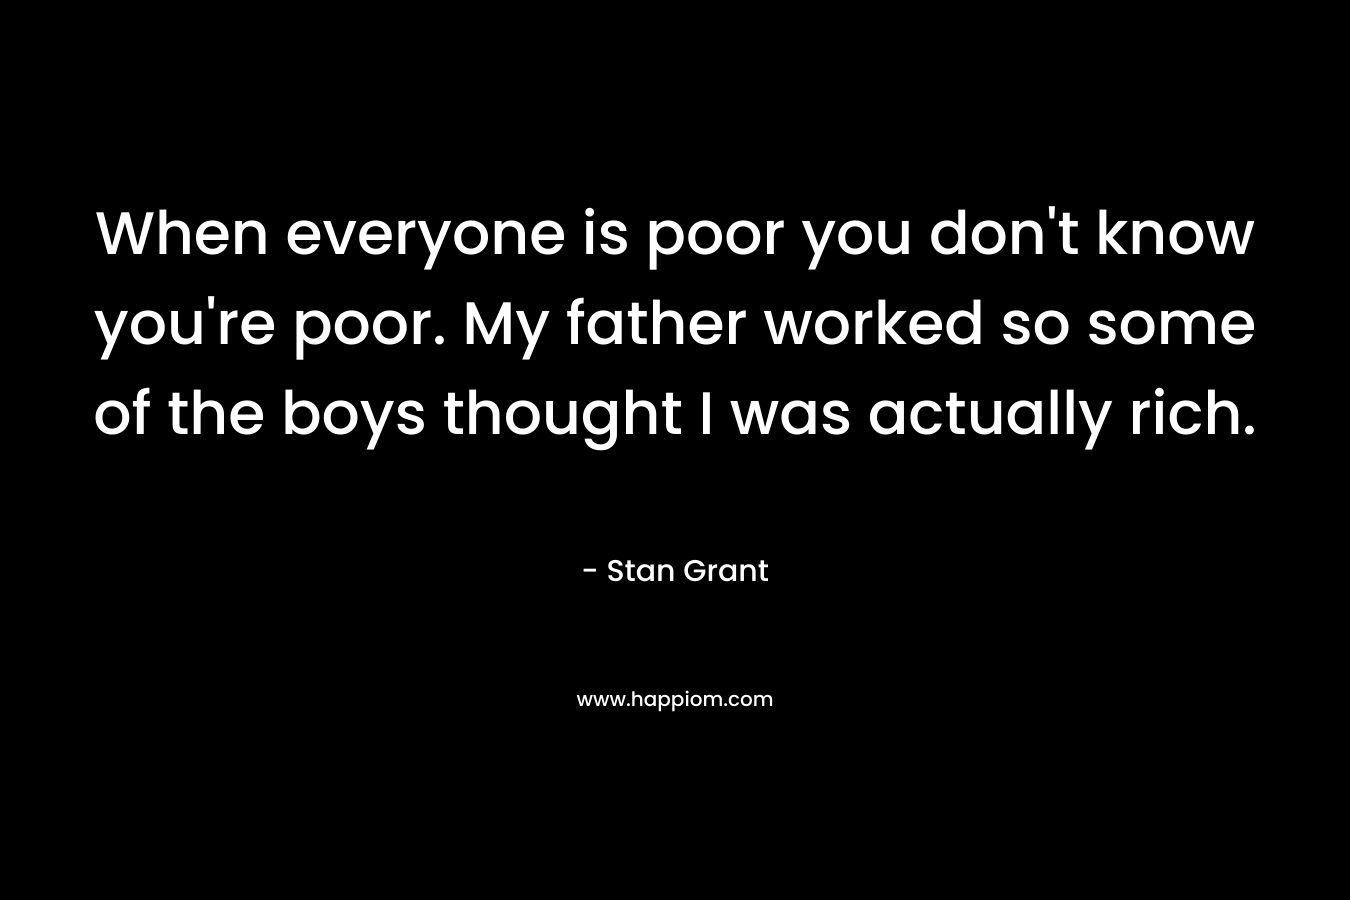 When everyone is poor you don't know you're poor. My father worked so some of the boys thought I was actually rich.